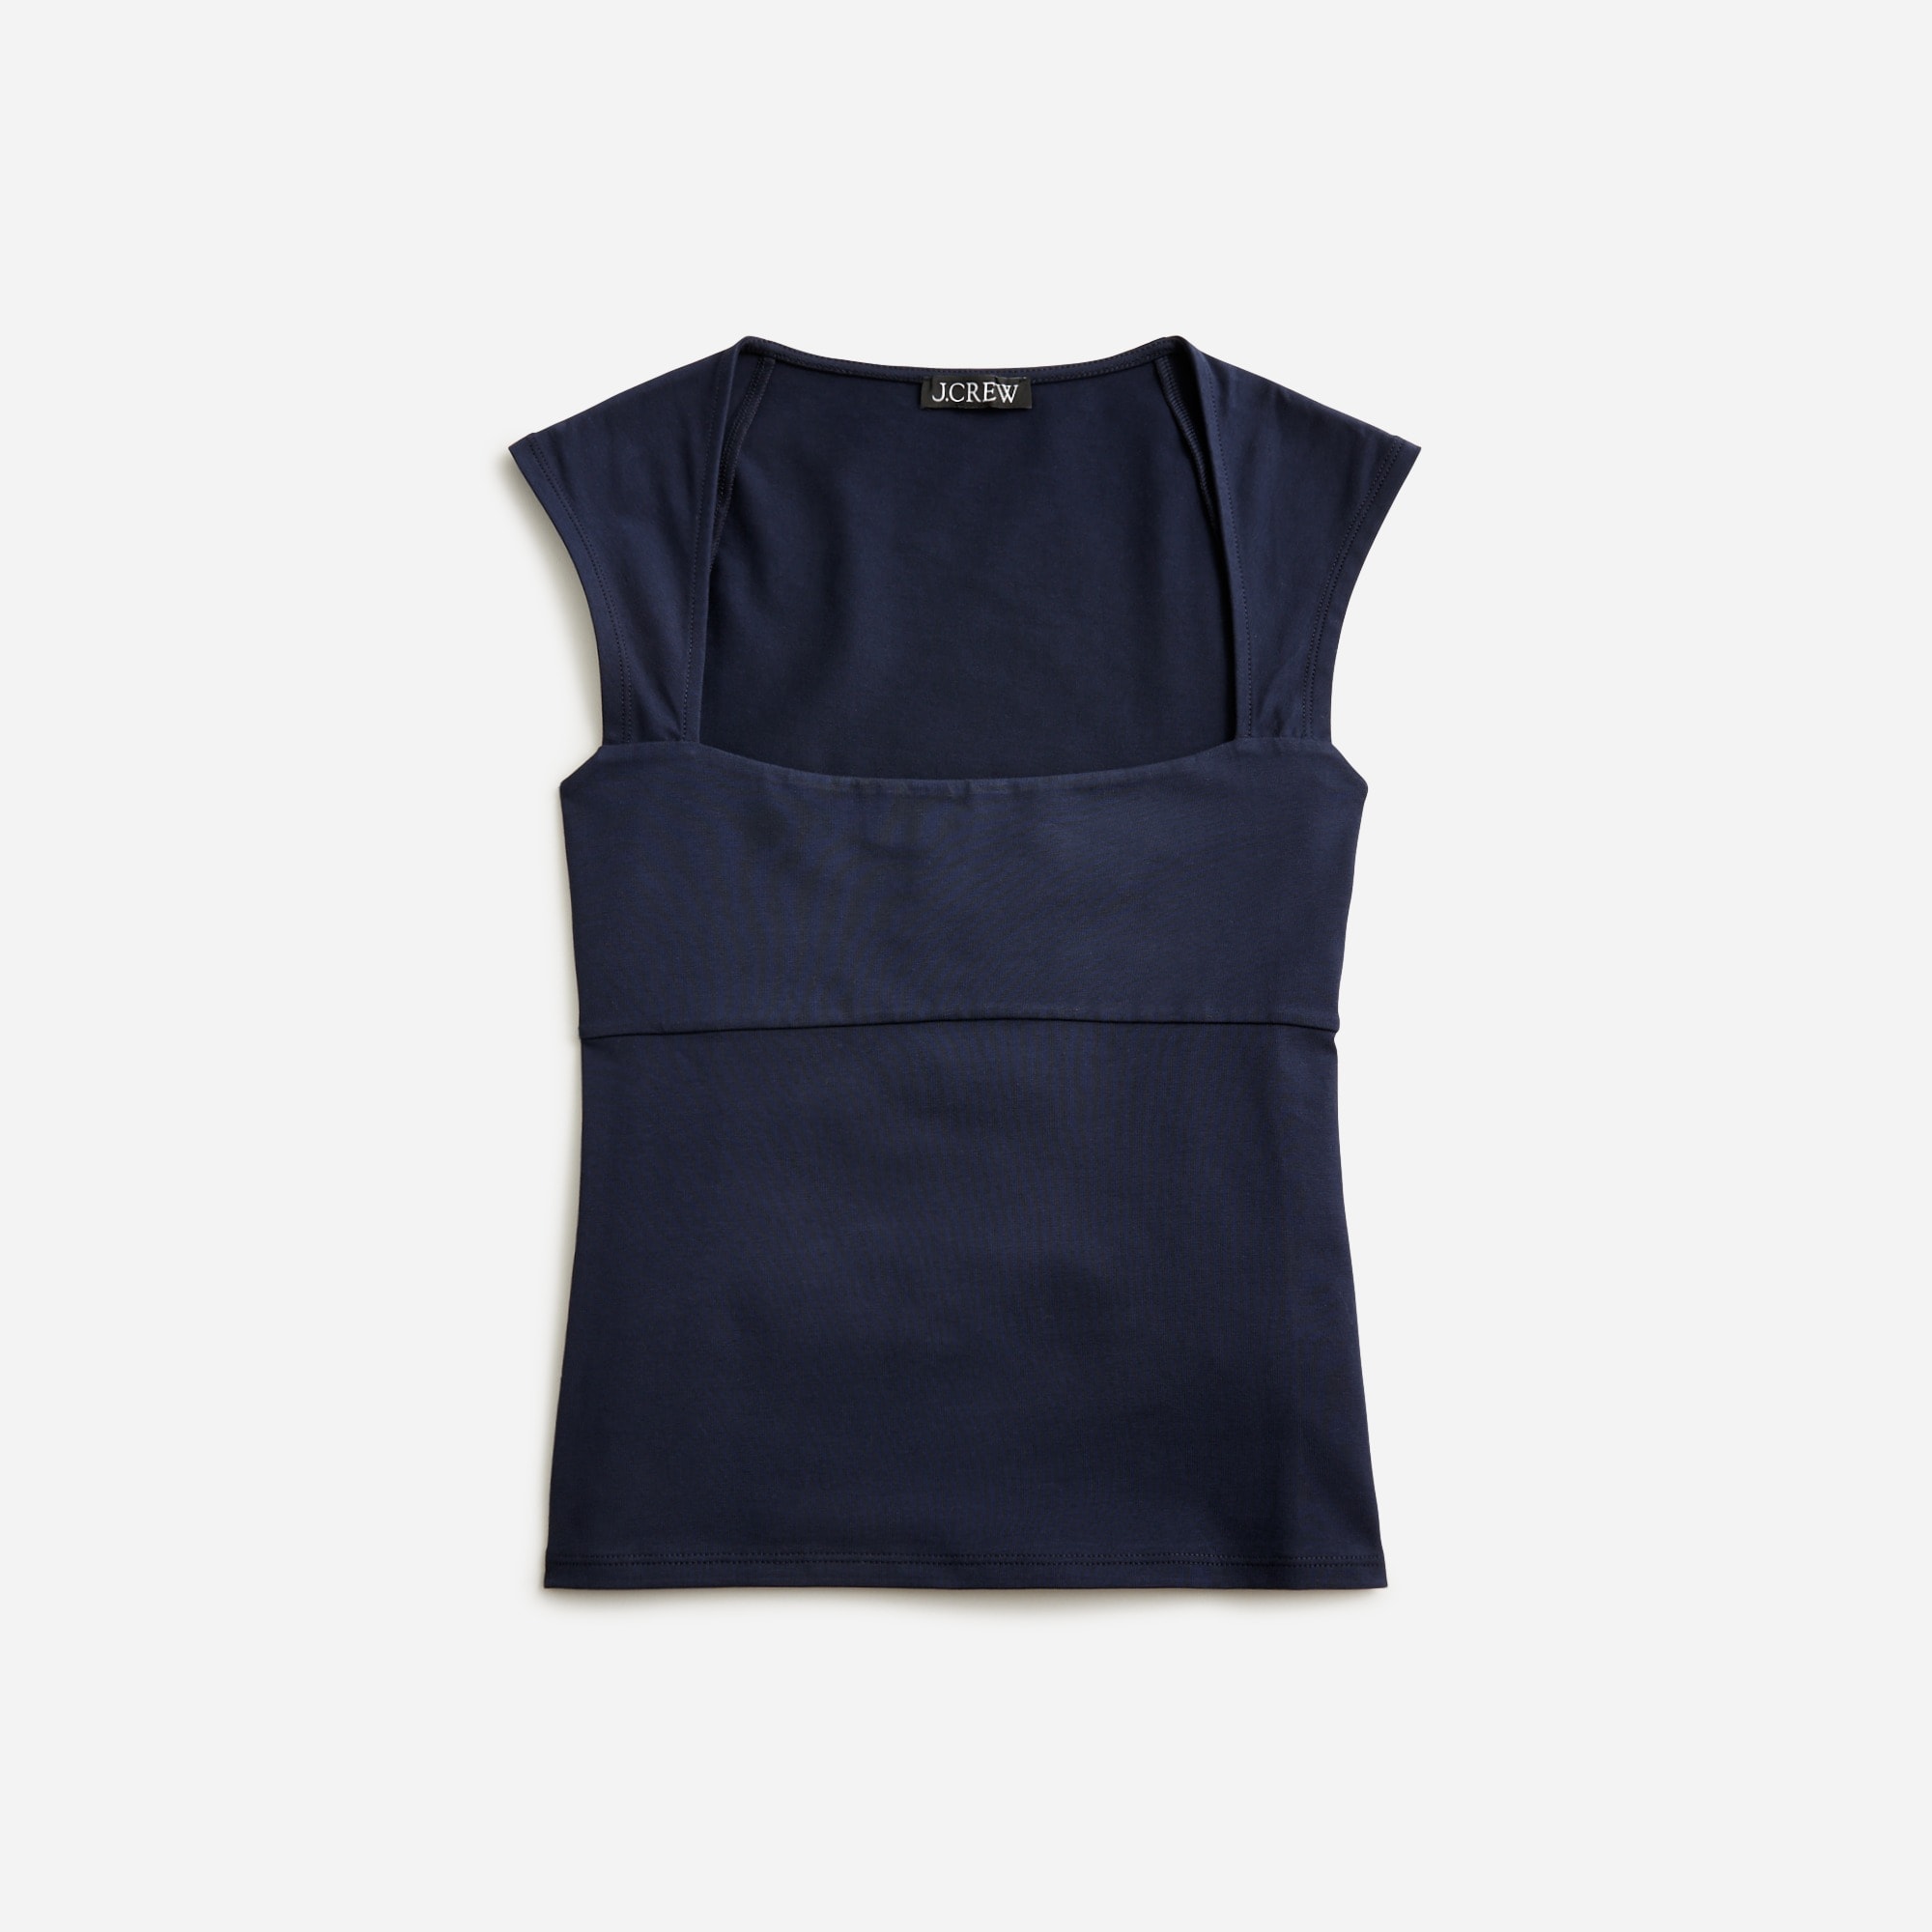  Squareneck cap-sleeve top in stretch cotton blend